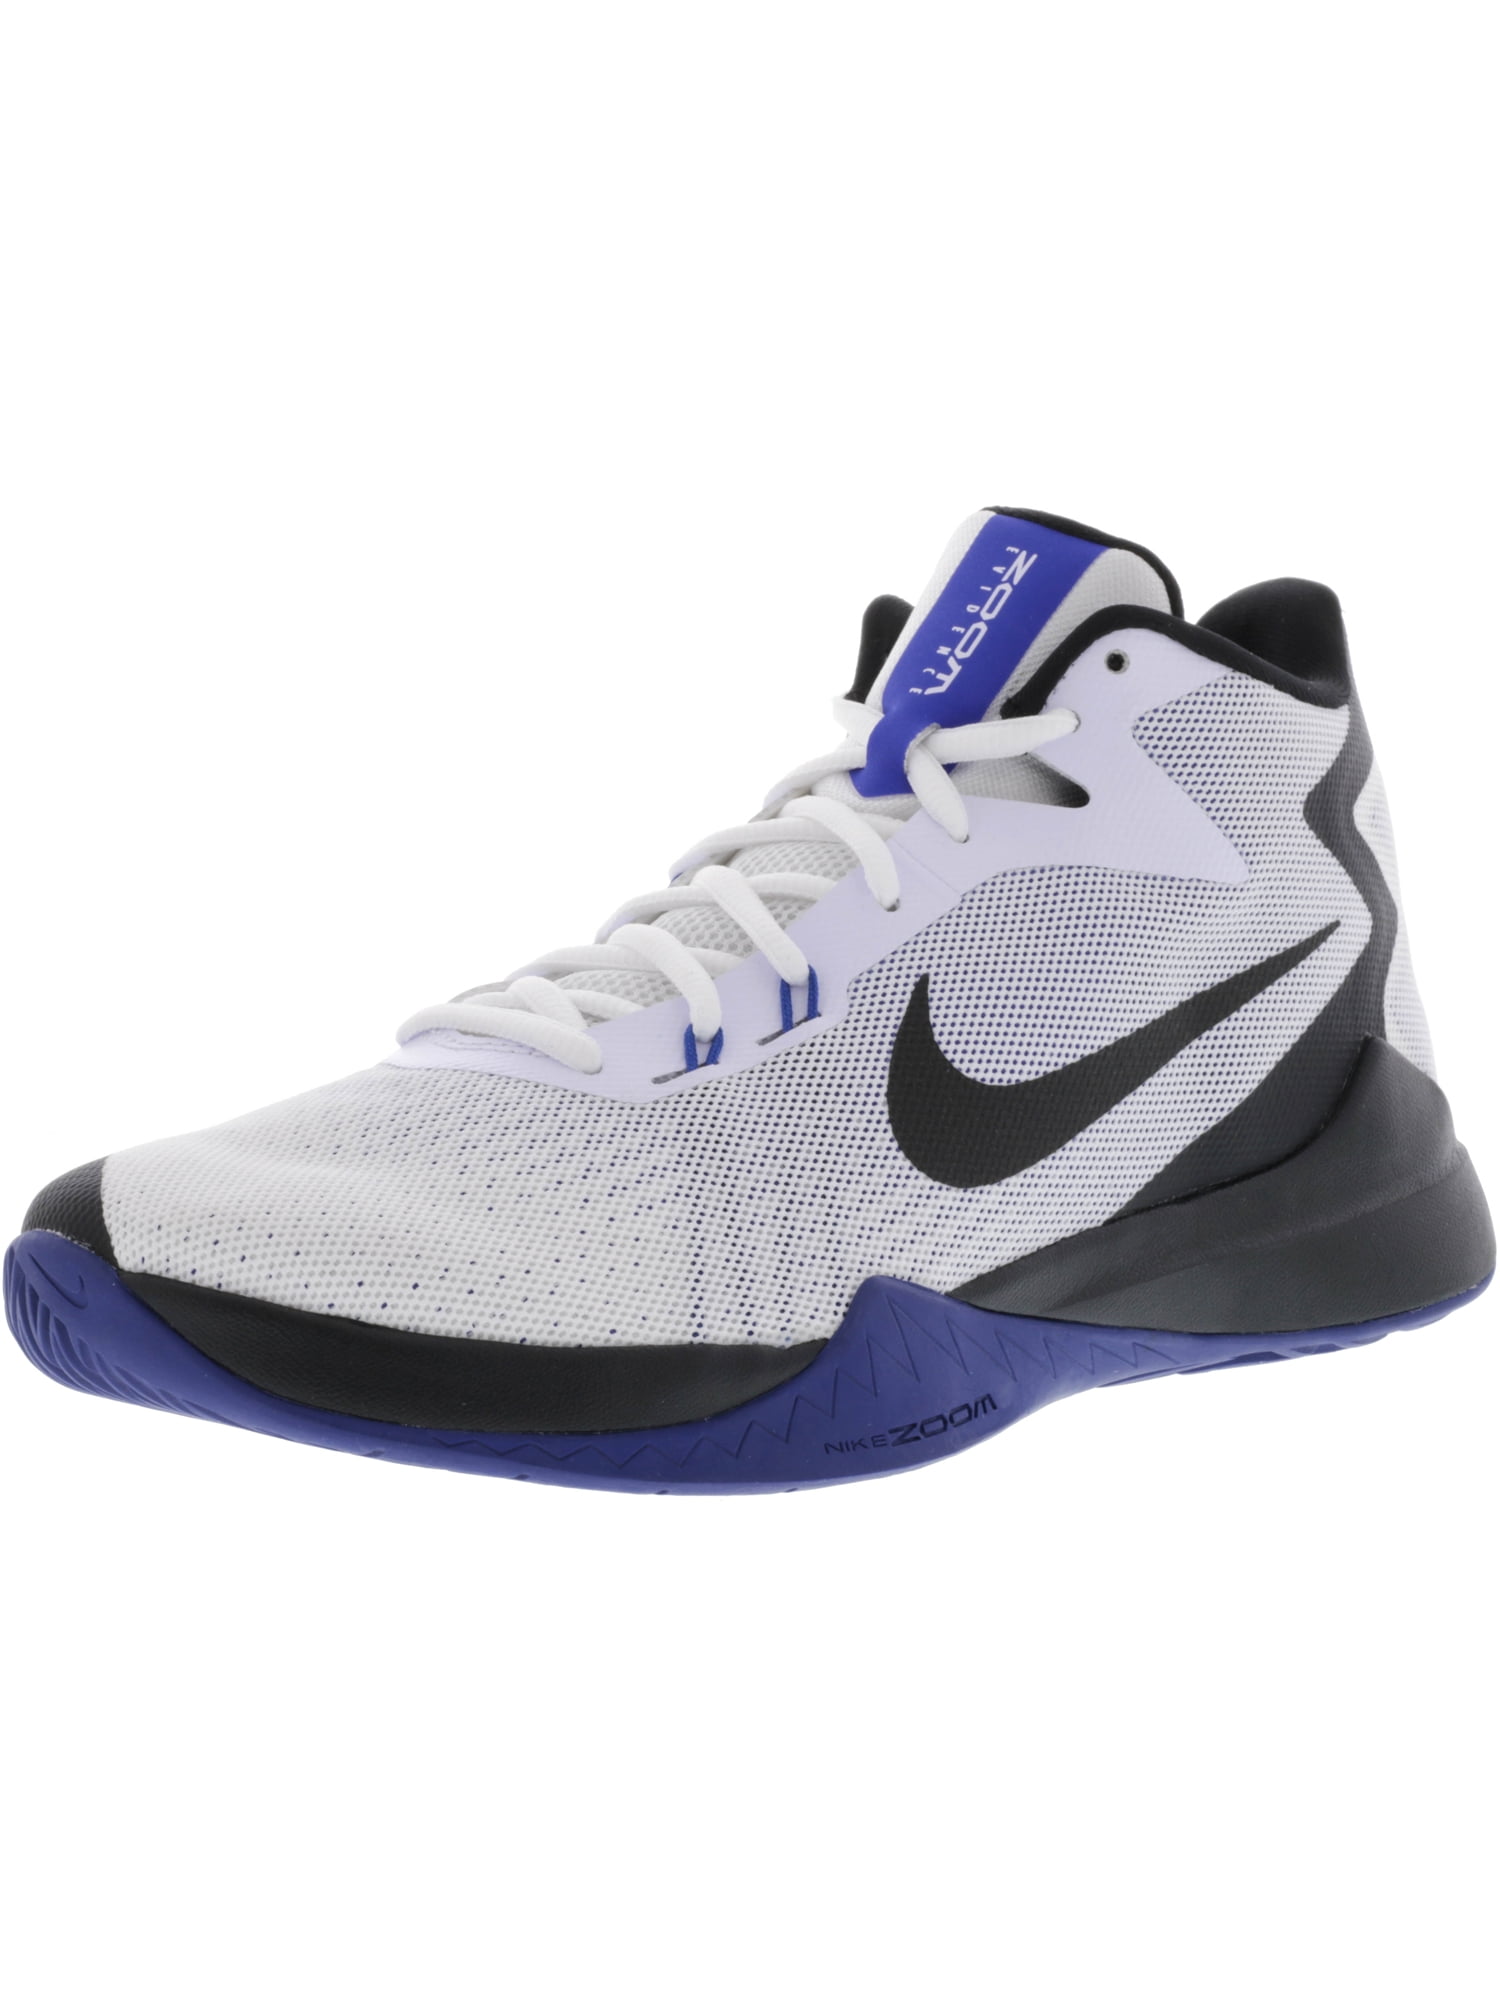 nike high ankle basketball shoes